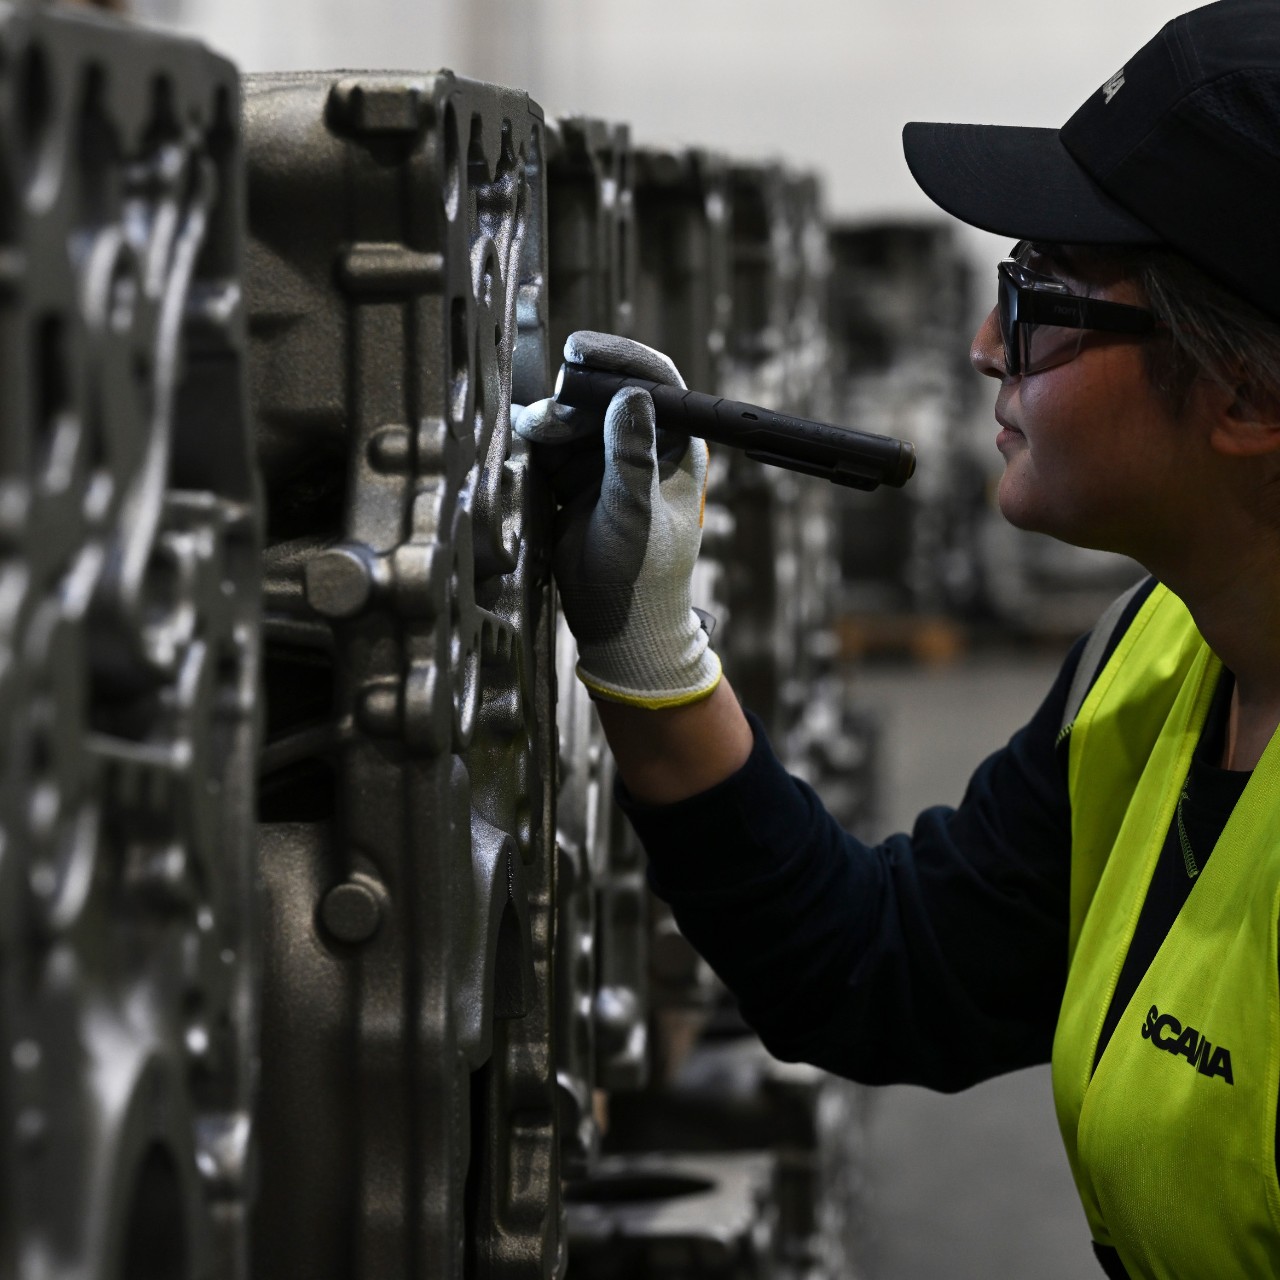 A female Scania employee shines a flashlight in Scania engine manufacturing.